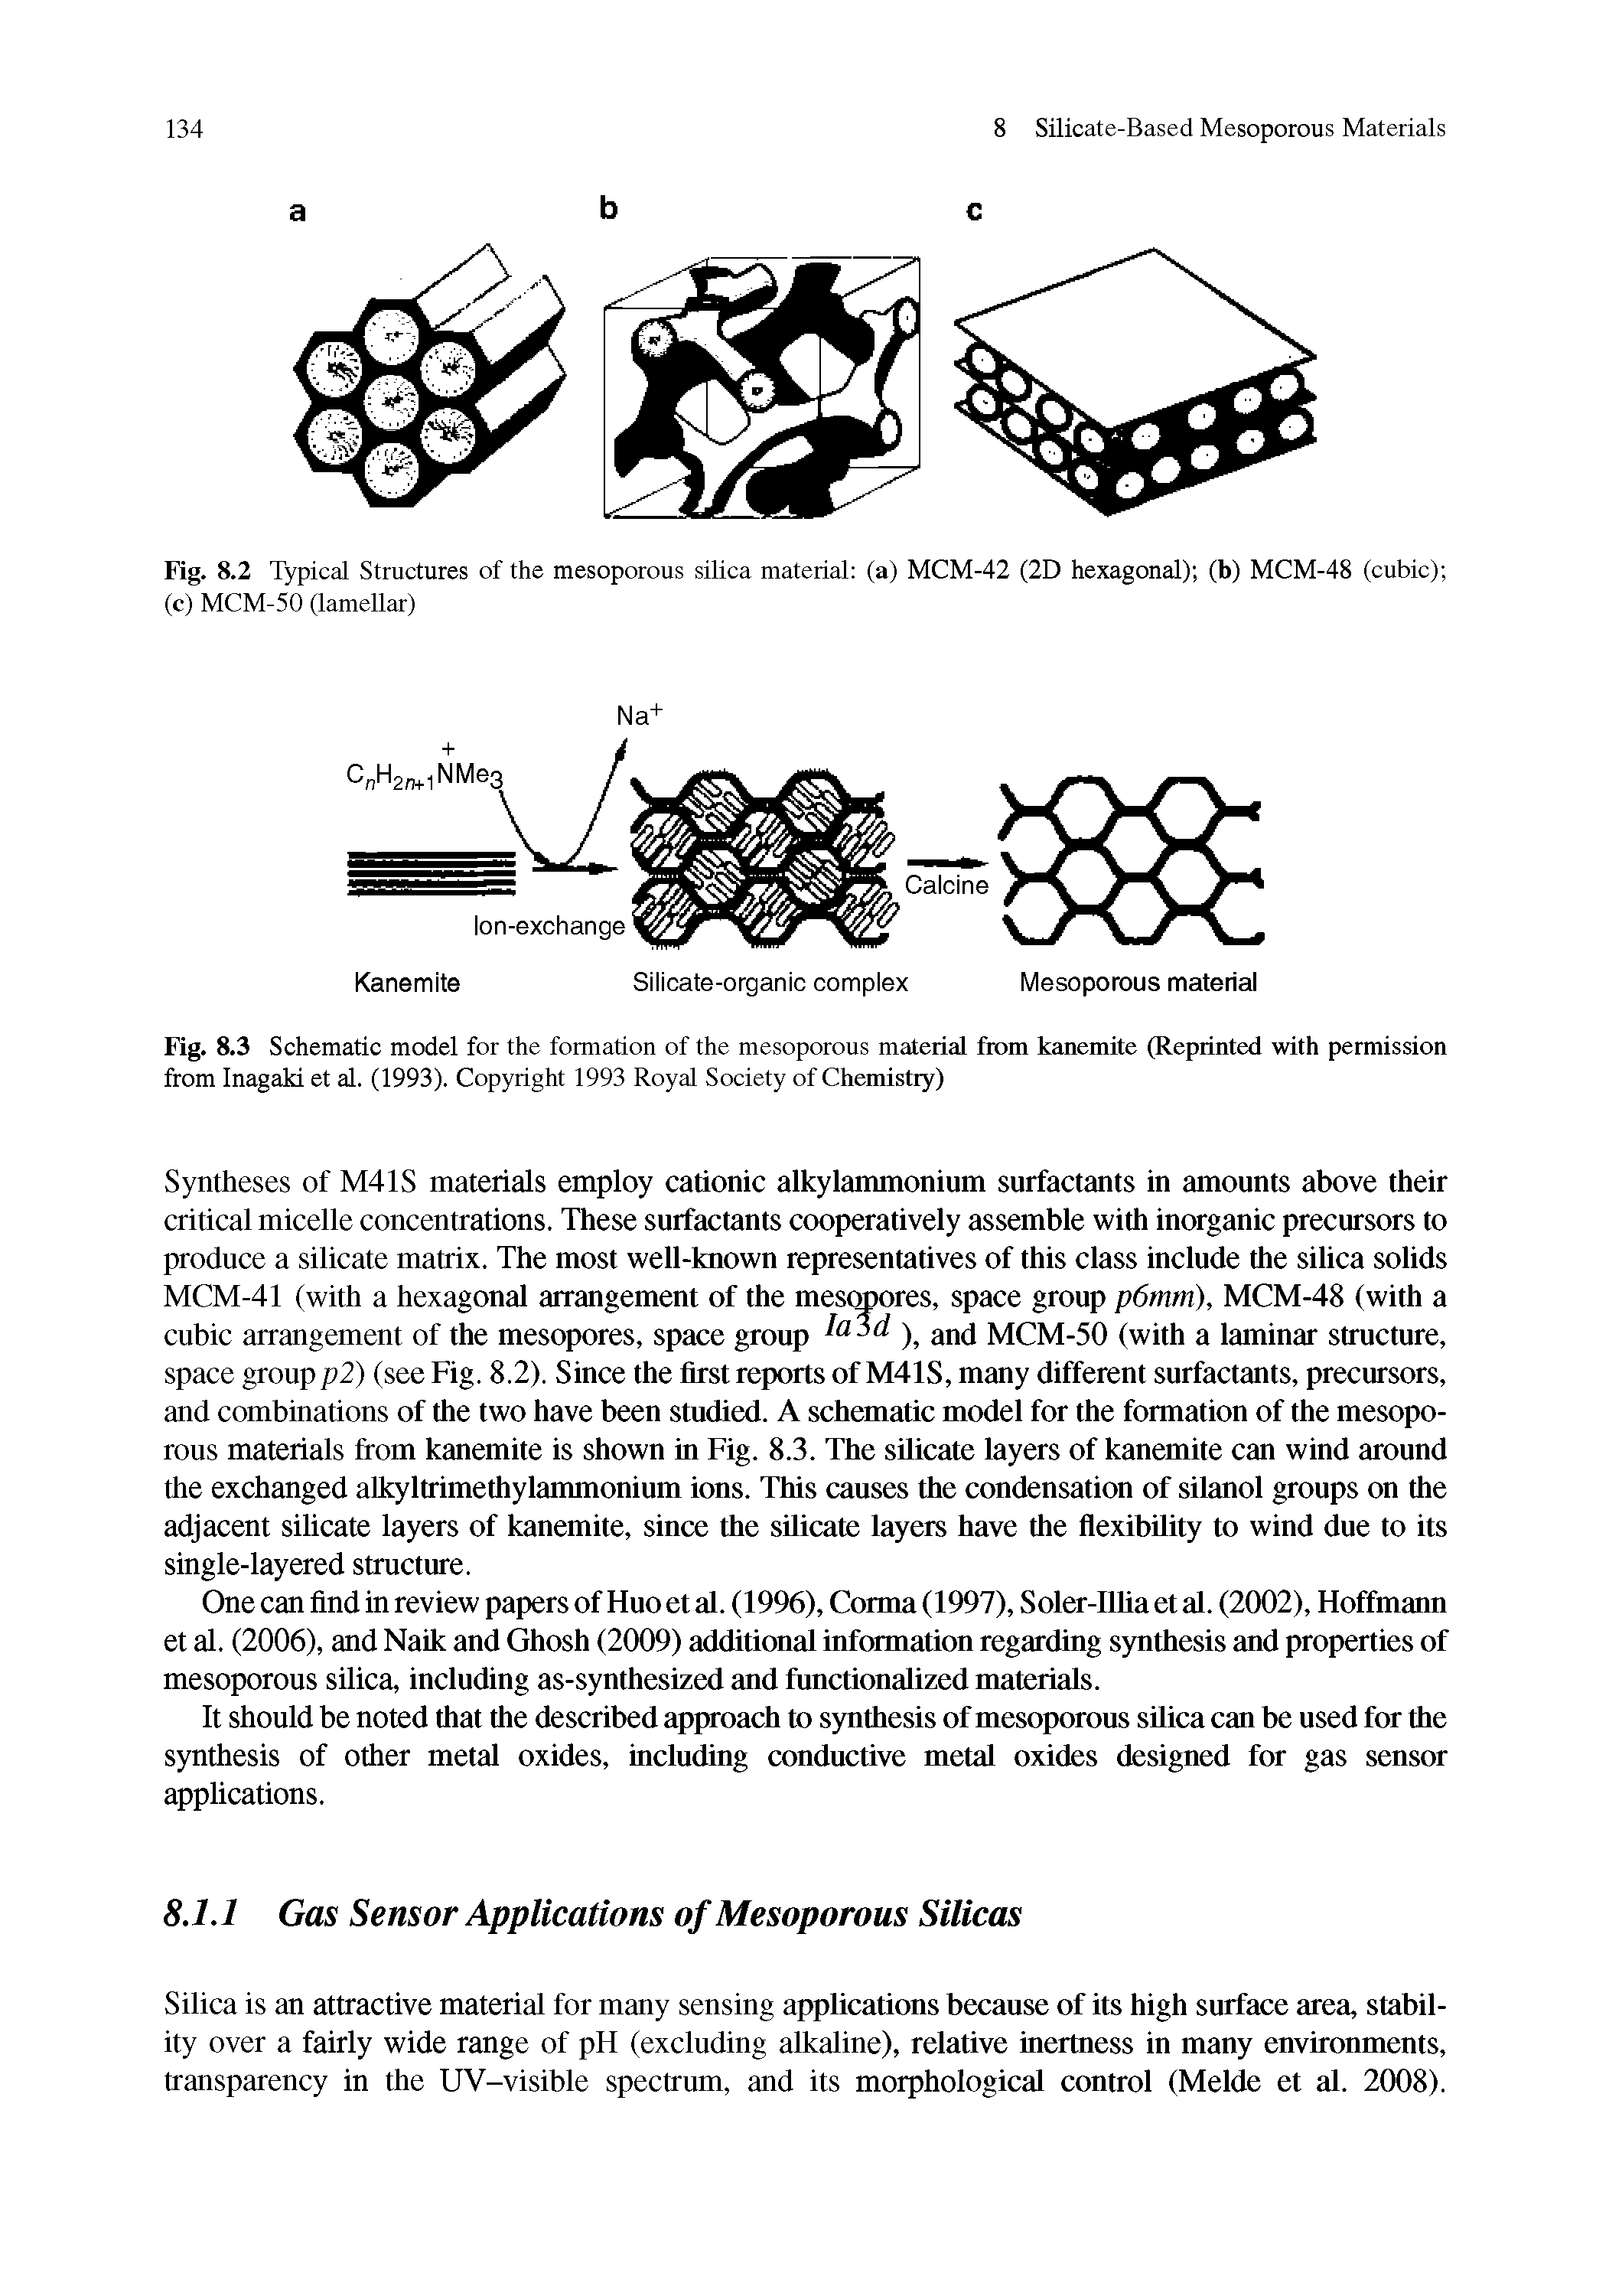 Fig. 8.3 Schematic model for the formation of the mesoporous material from kanemite (Reprinted with permission from Inagaki et al. (1993). Copyright 1993 Royal Society of Chemistry)...